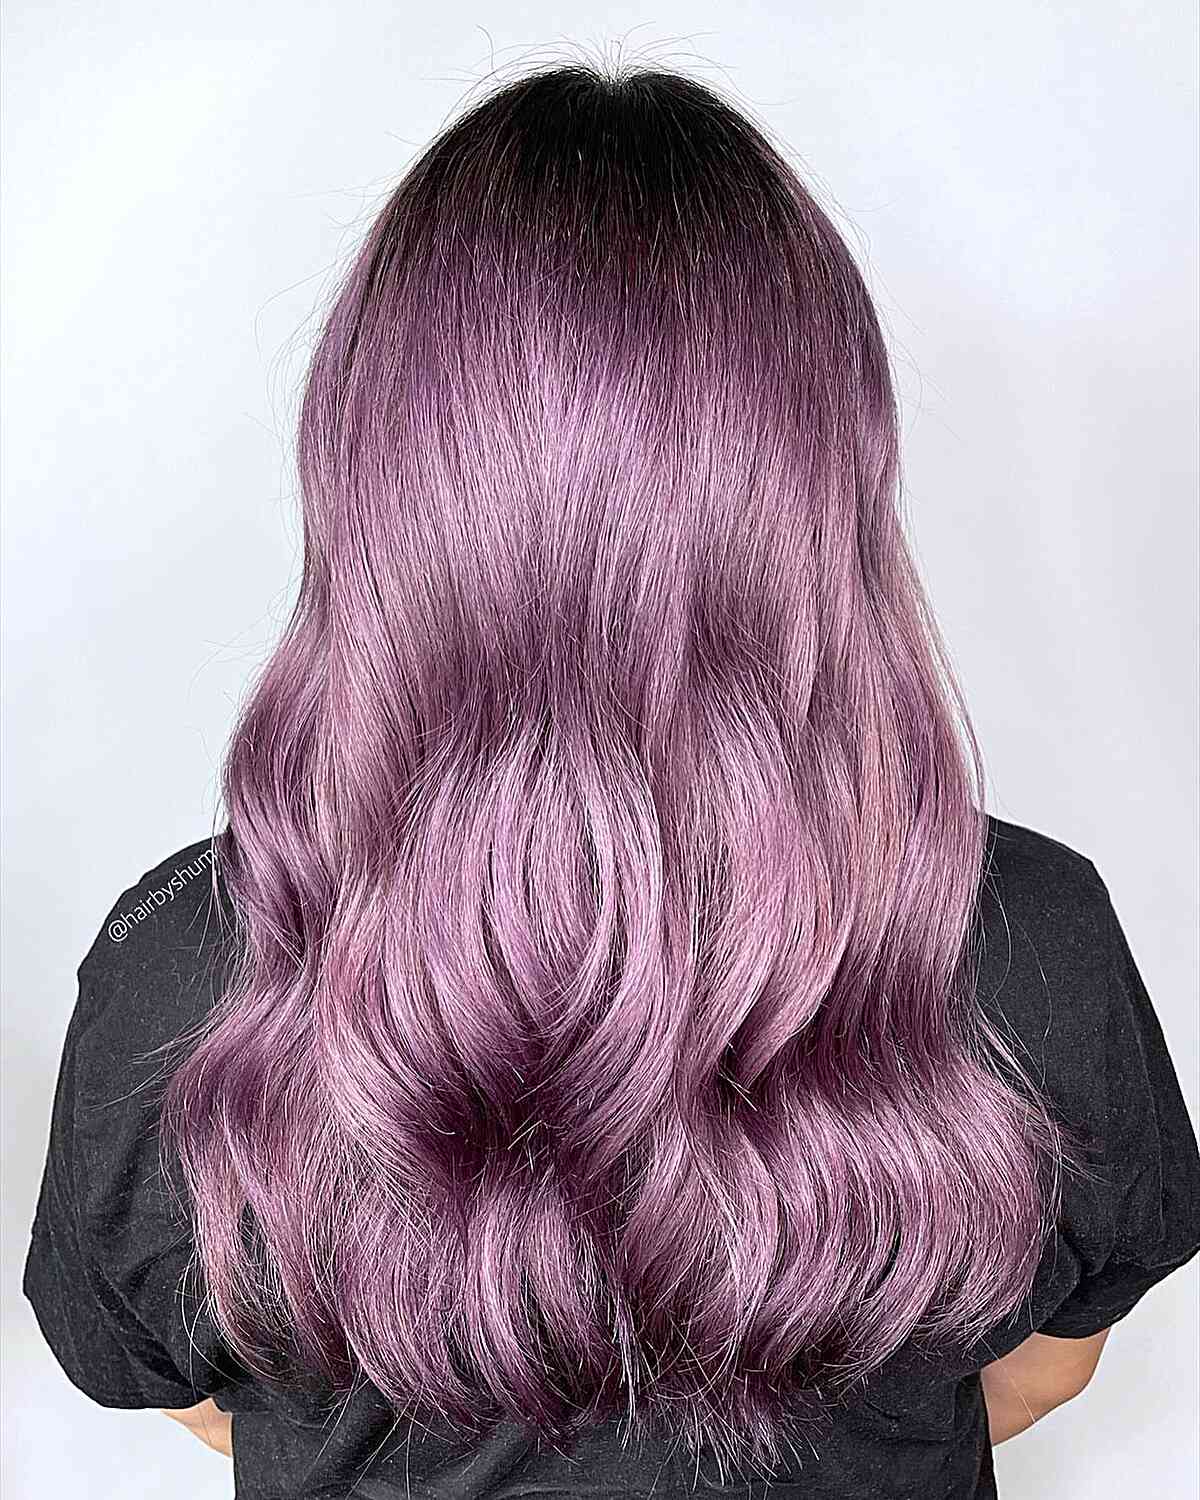 Lilac purple hairstyle